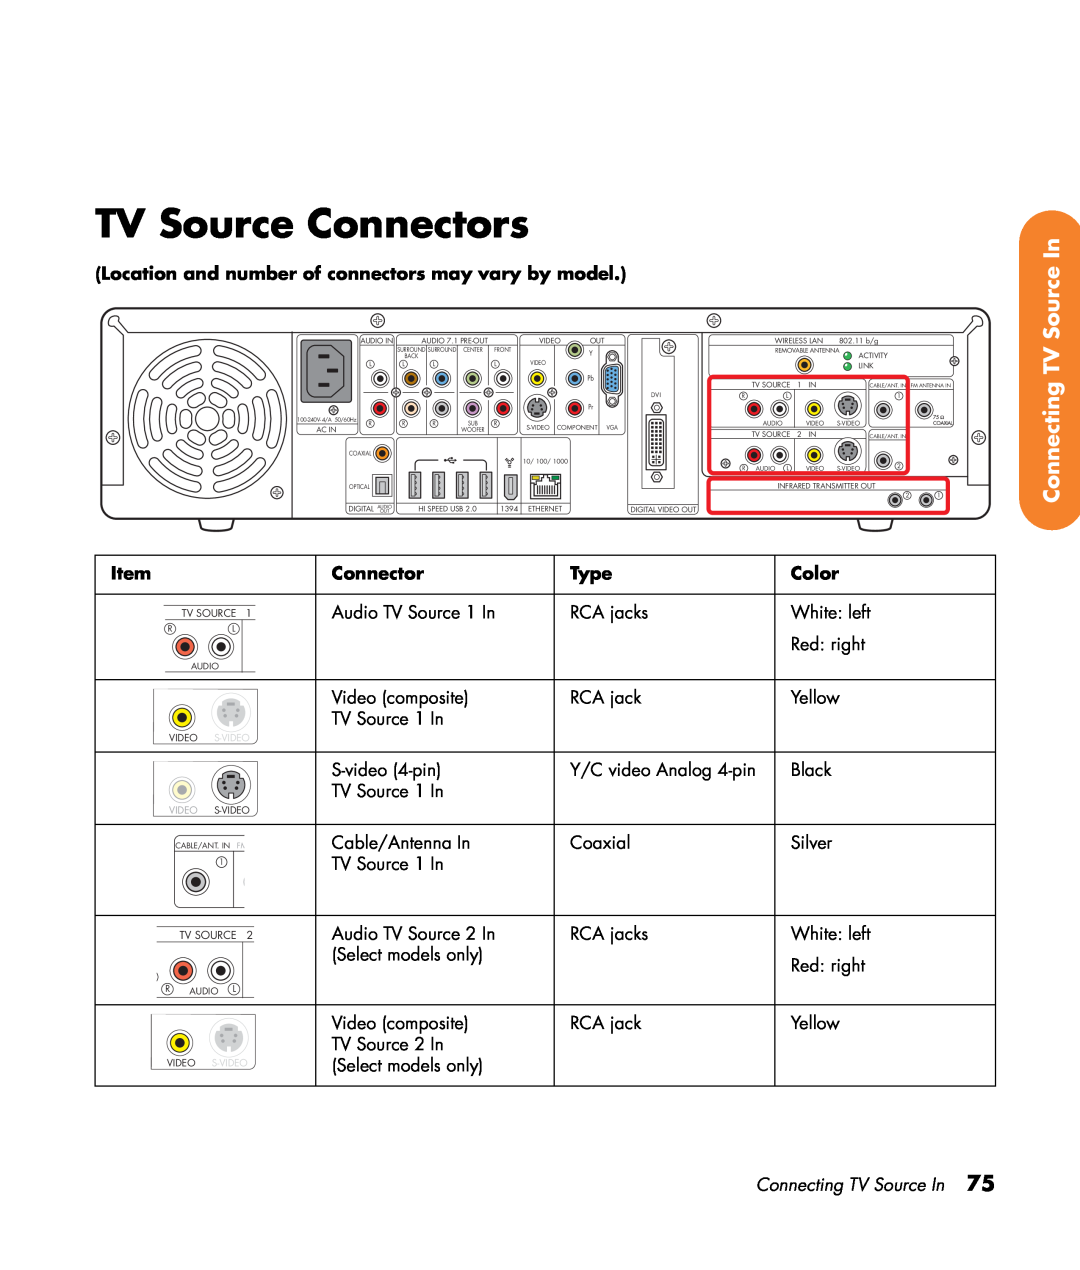 HP z555 TV Source Connectors, Connecting TV Source In, Location and number of connectors may vary by model, Type, Color 